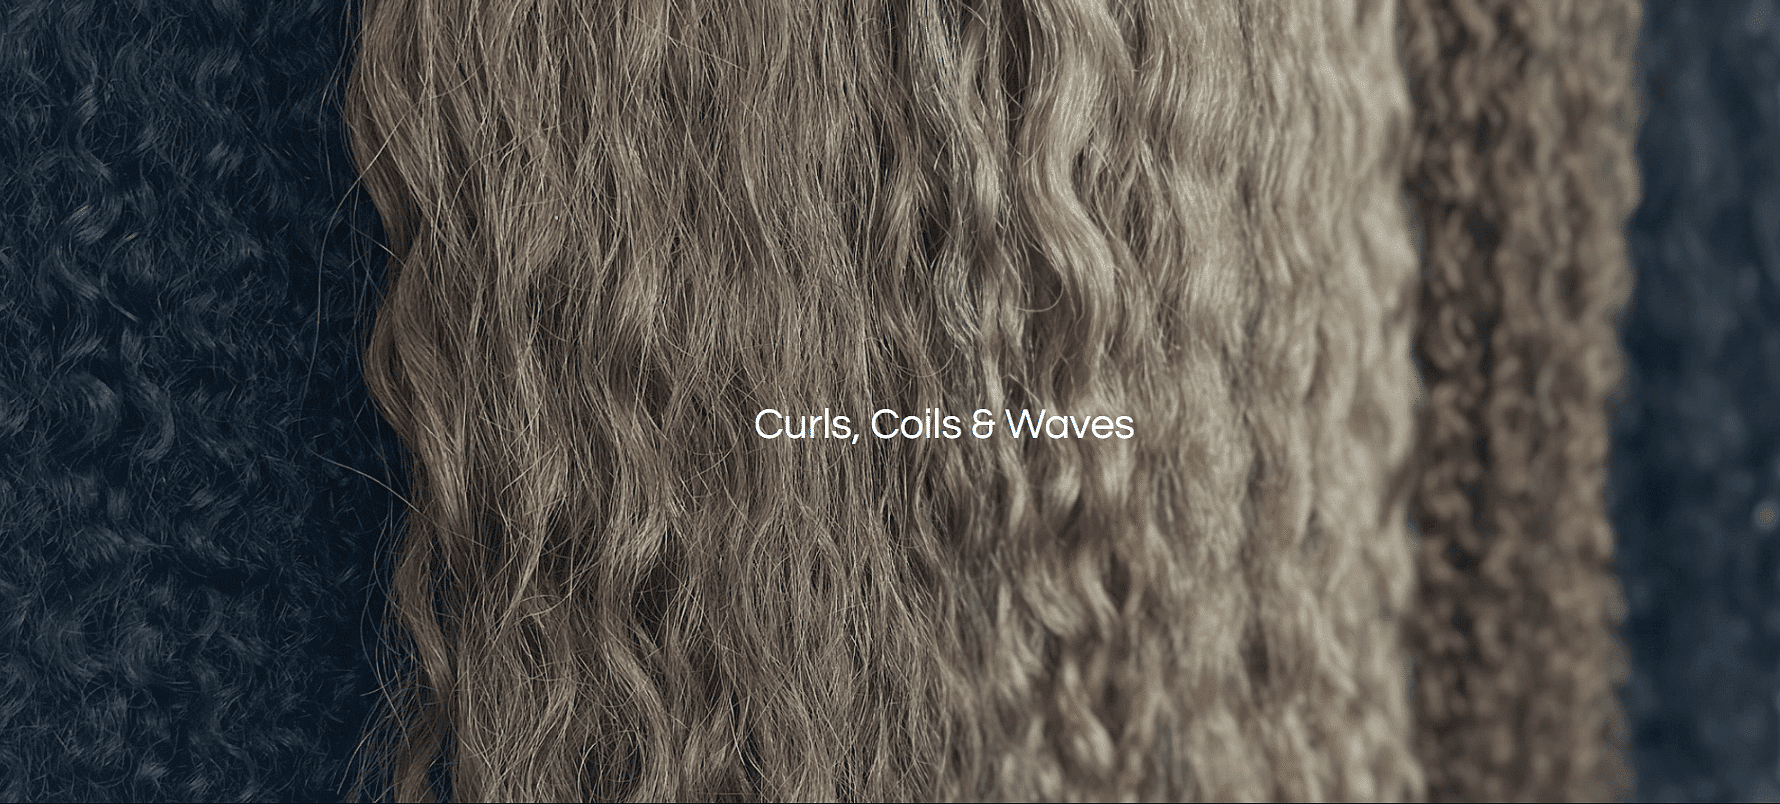 Close-up of textured curly hair with "Curls, Coils & Waves" text overlay.